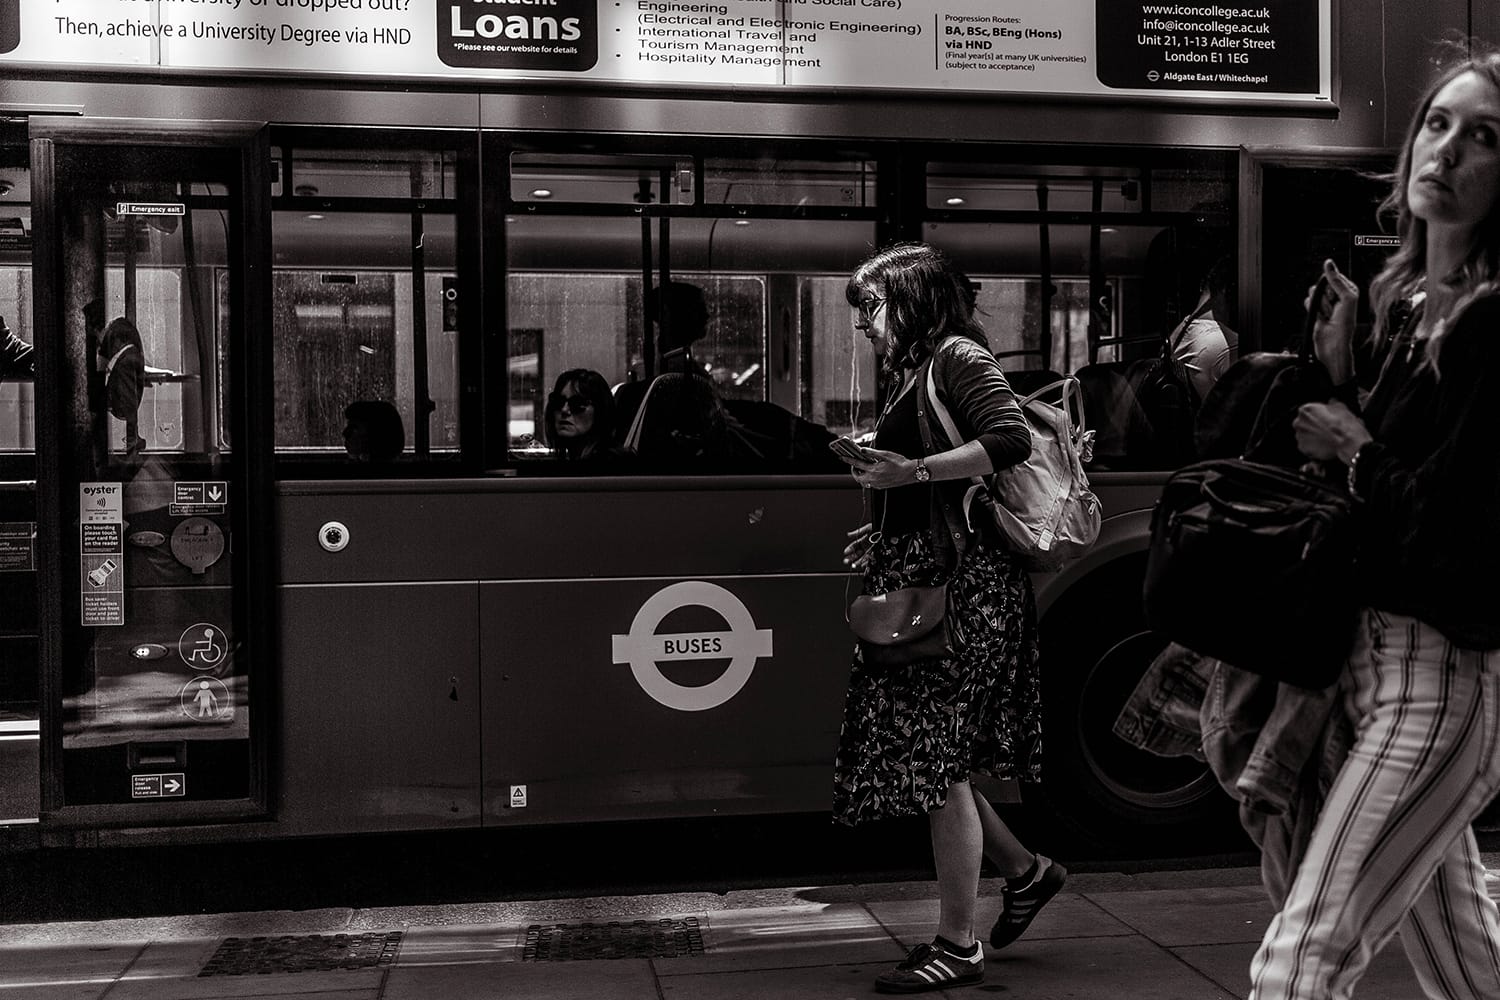 How to Successfully Use Zone Focusing to Improve Your Street Photographs